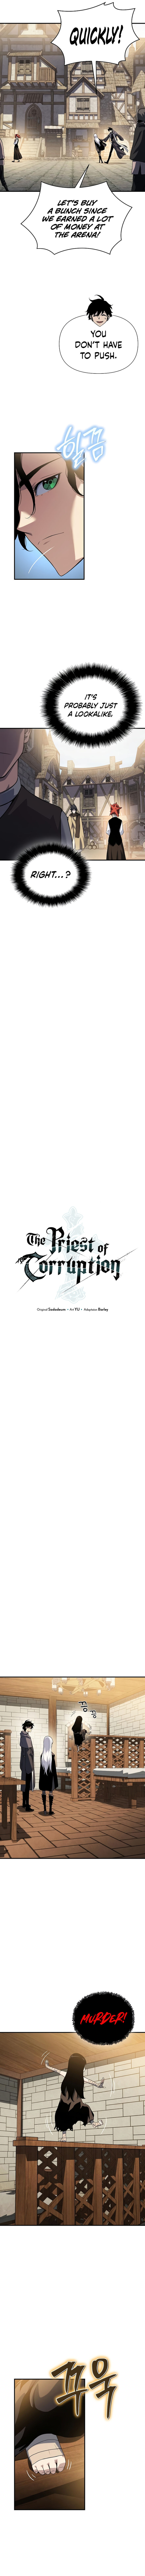 The Priest Of Corruption 37 2